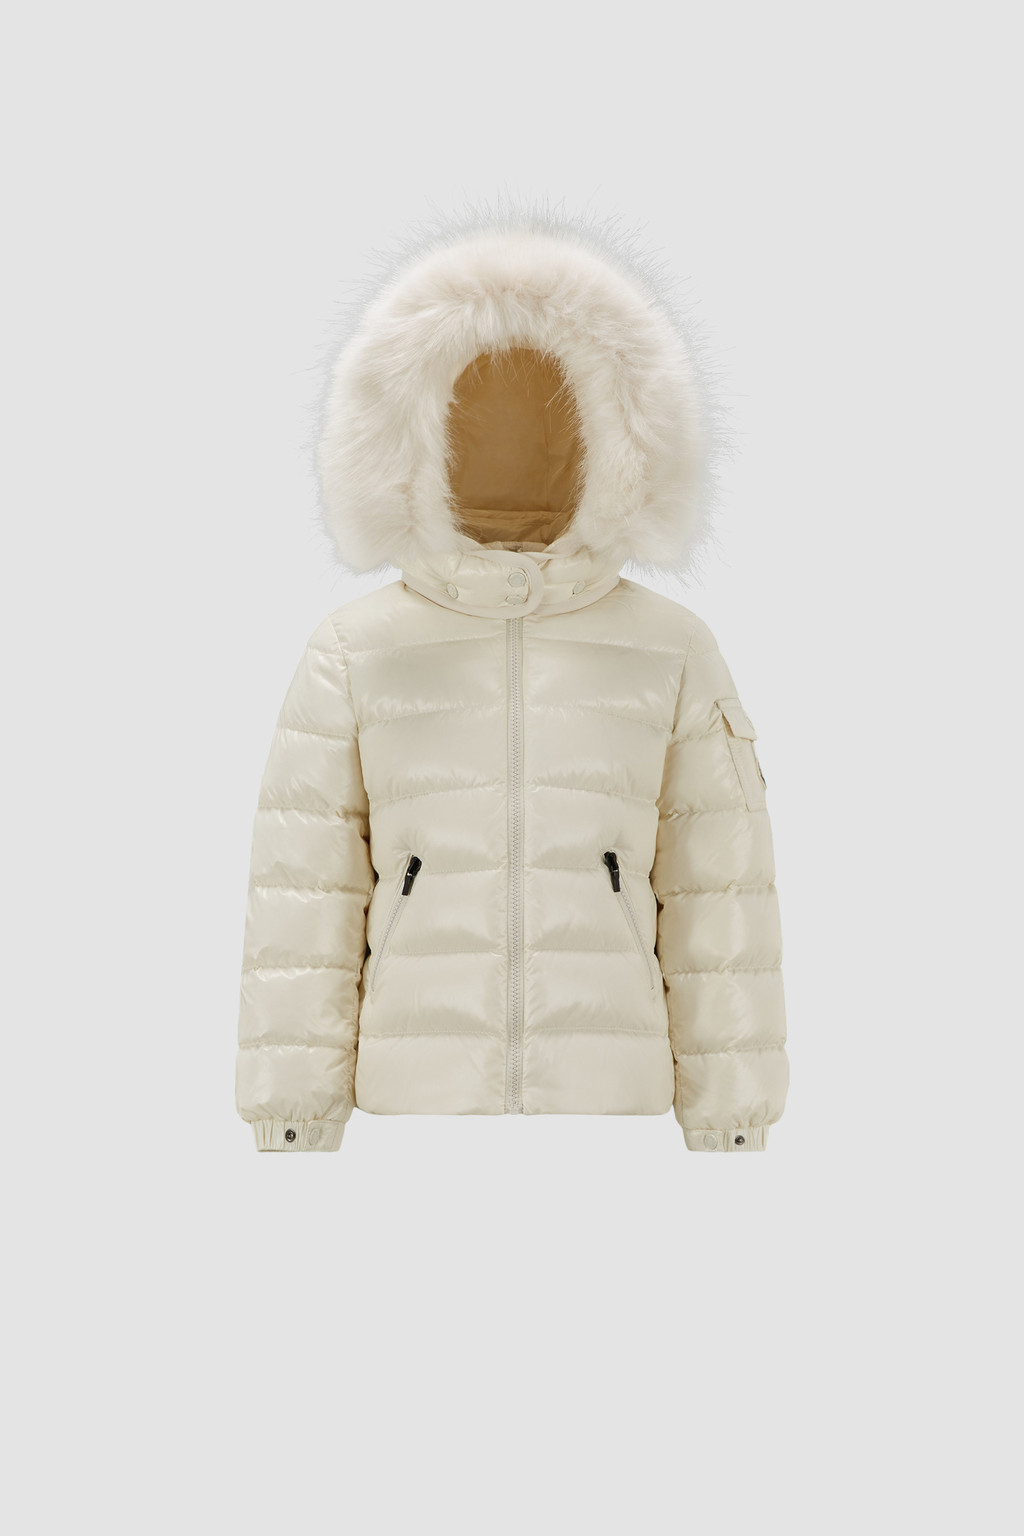 Best Winter Coats for Kids, From Babies to Preteens | TIME Stamped